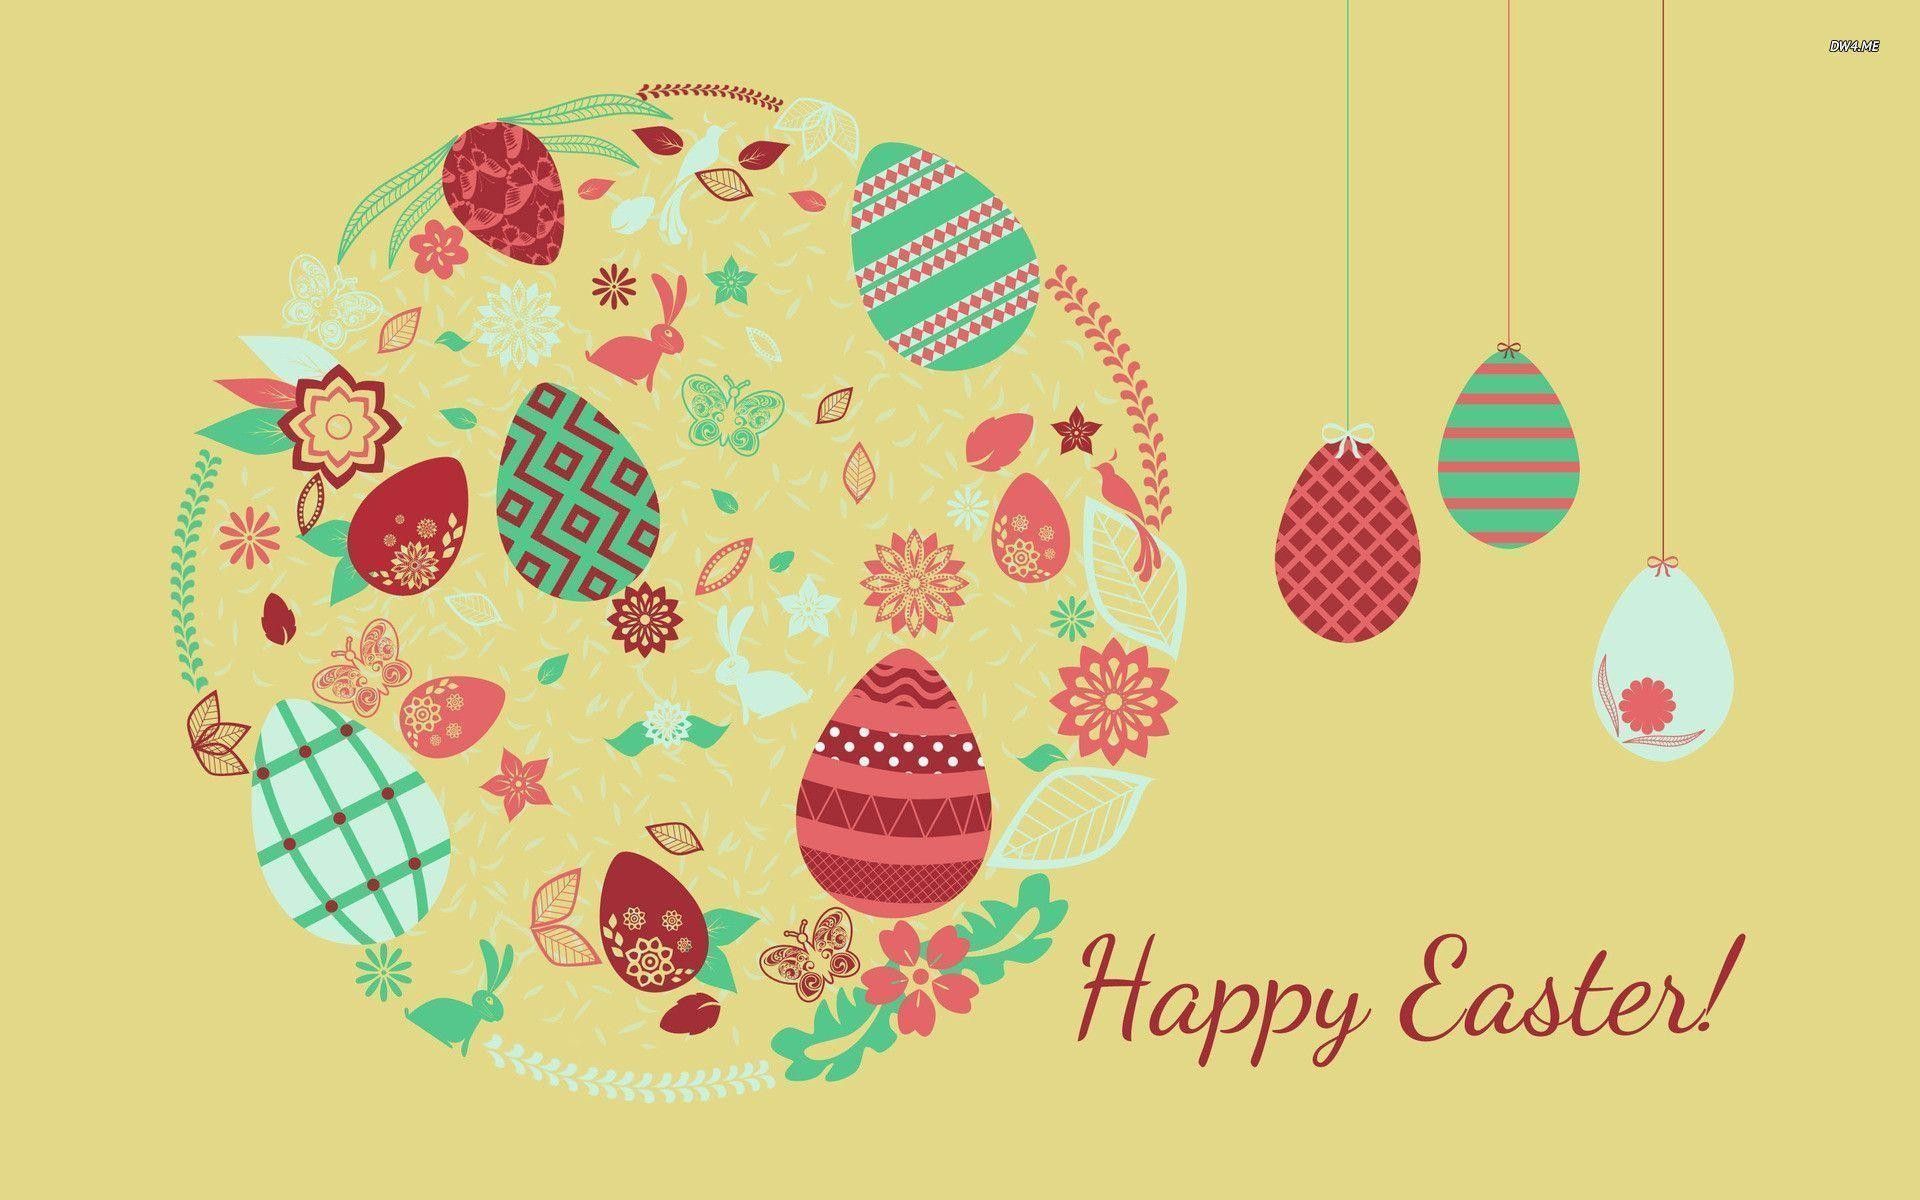 Happy Easter Wallpaper background picture